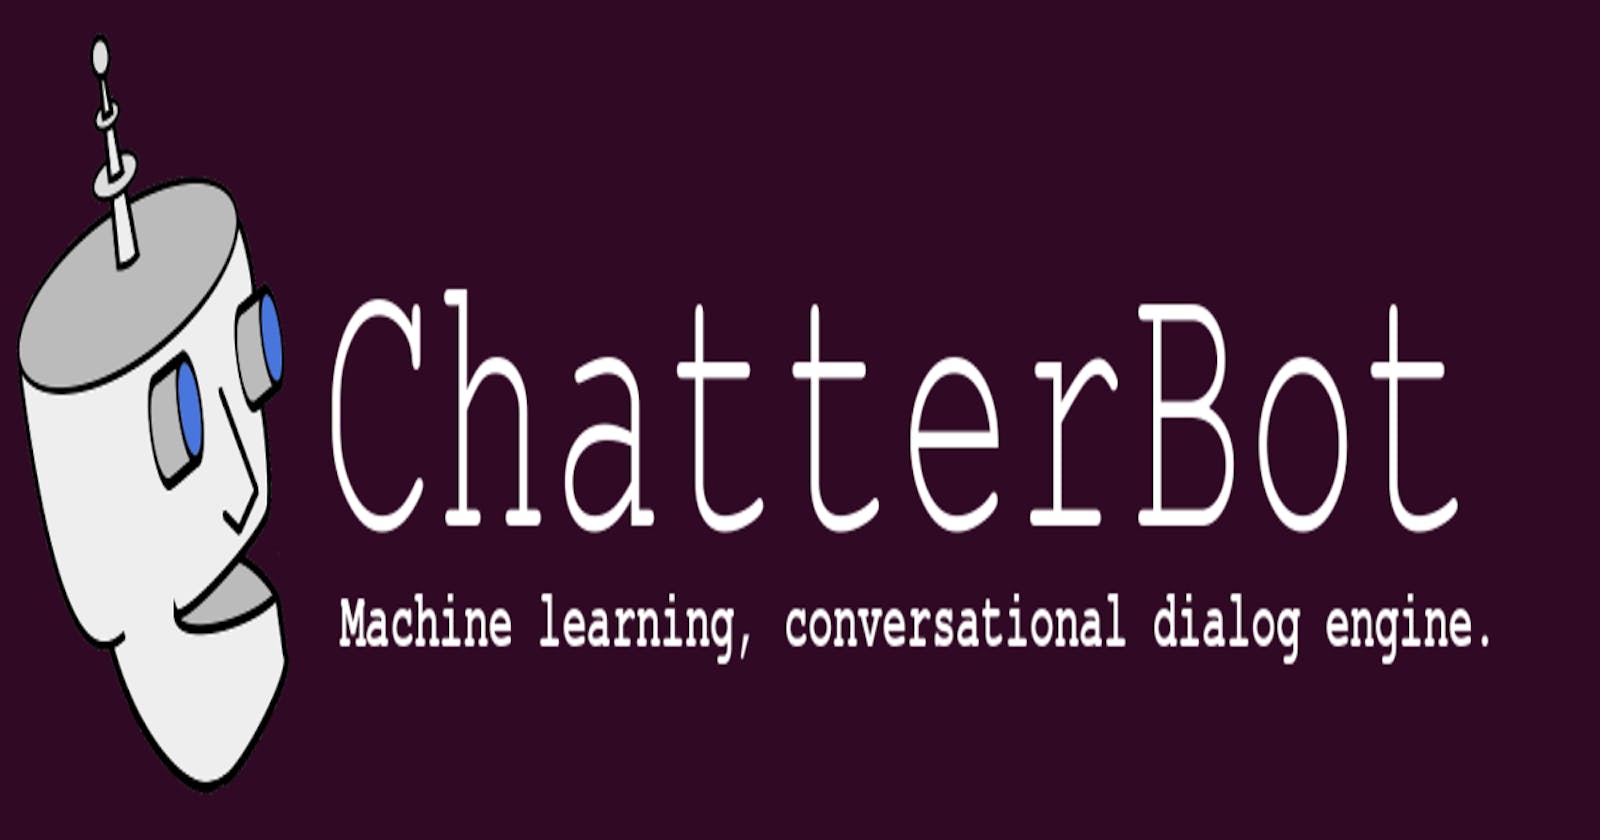 Build ChatBot with ChatterBot and Python - Part 1